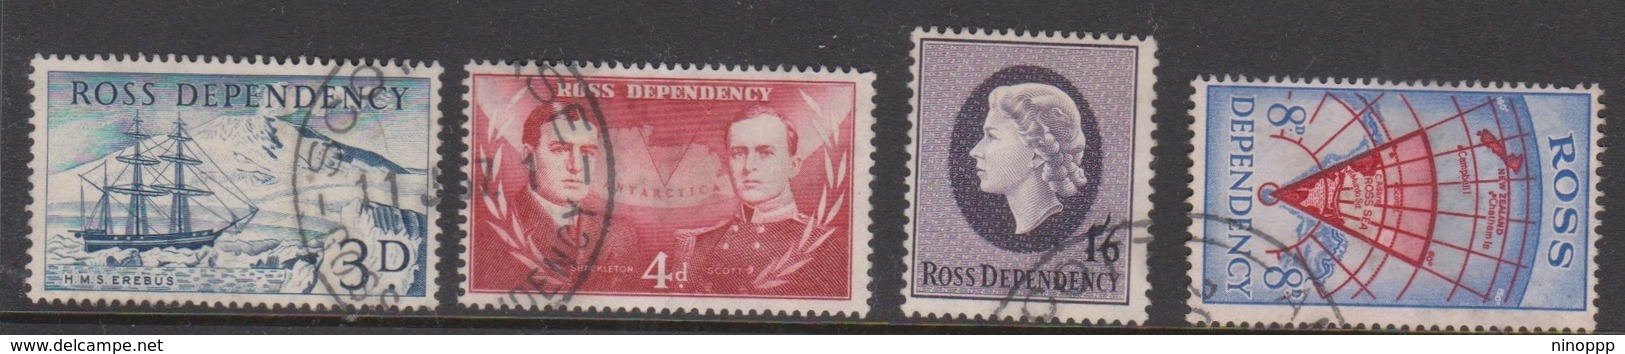 New Zealand-Ross Dependency  SG 1-4  1957 Definitives, Used - Used Stamps